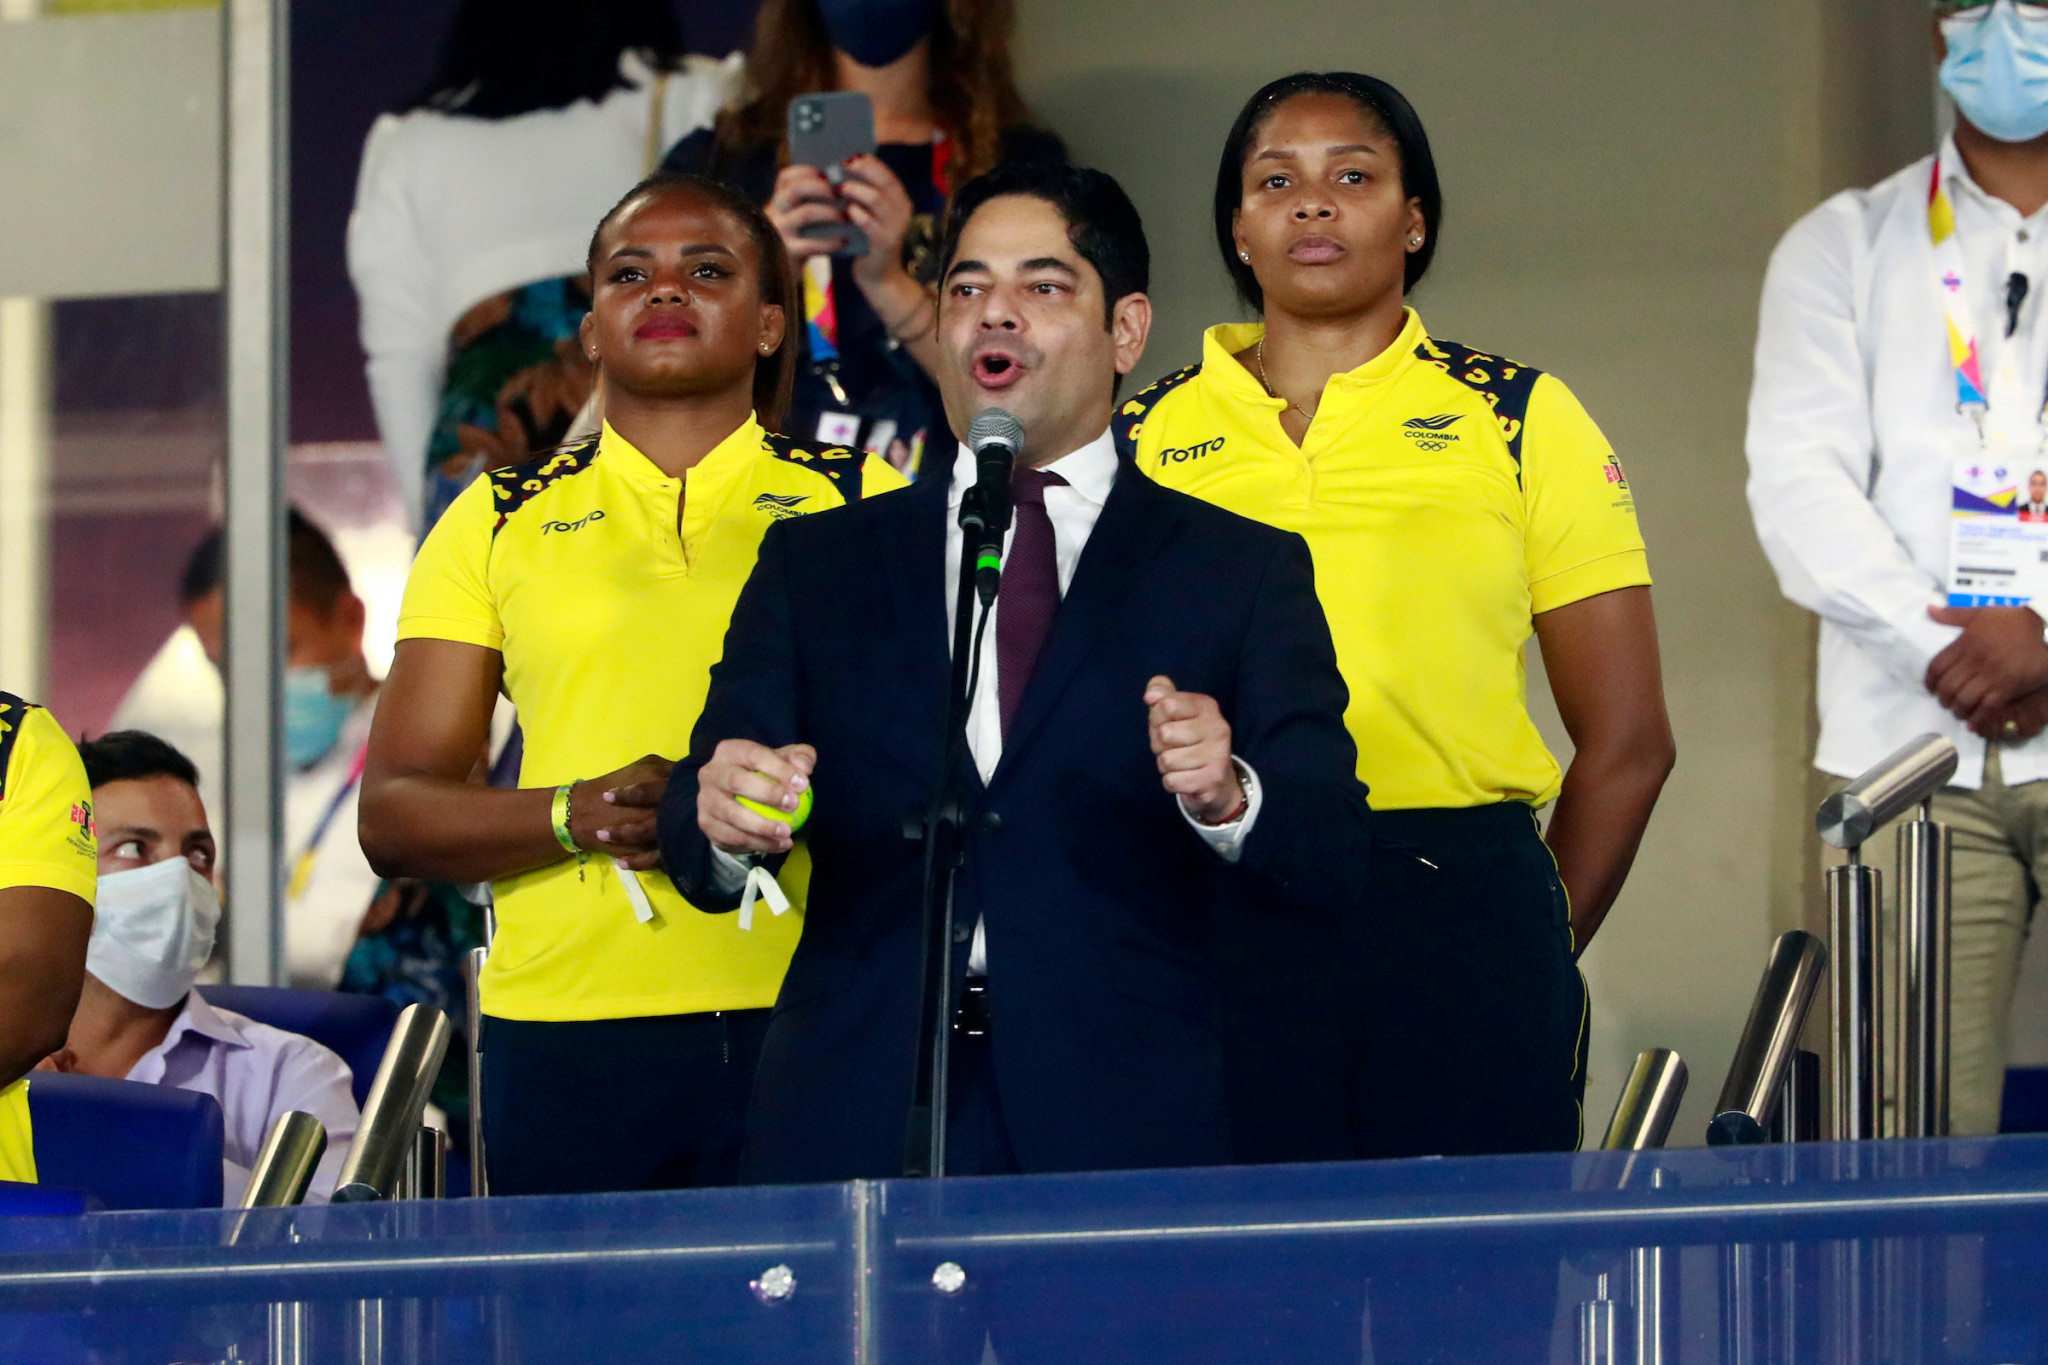 Colombian Sports Minister Guillermo Herrera delivered a rousing speech as the Junior Pan American Games offically got underway ©Agencia.XpressMedia